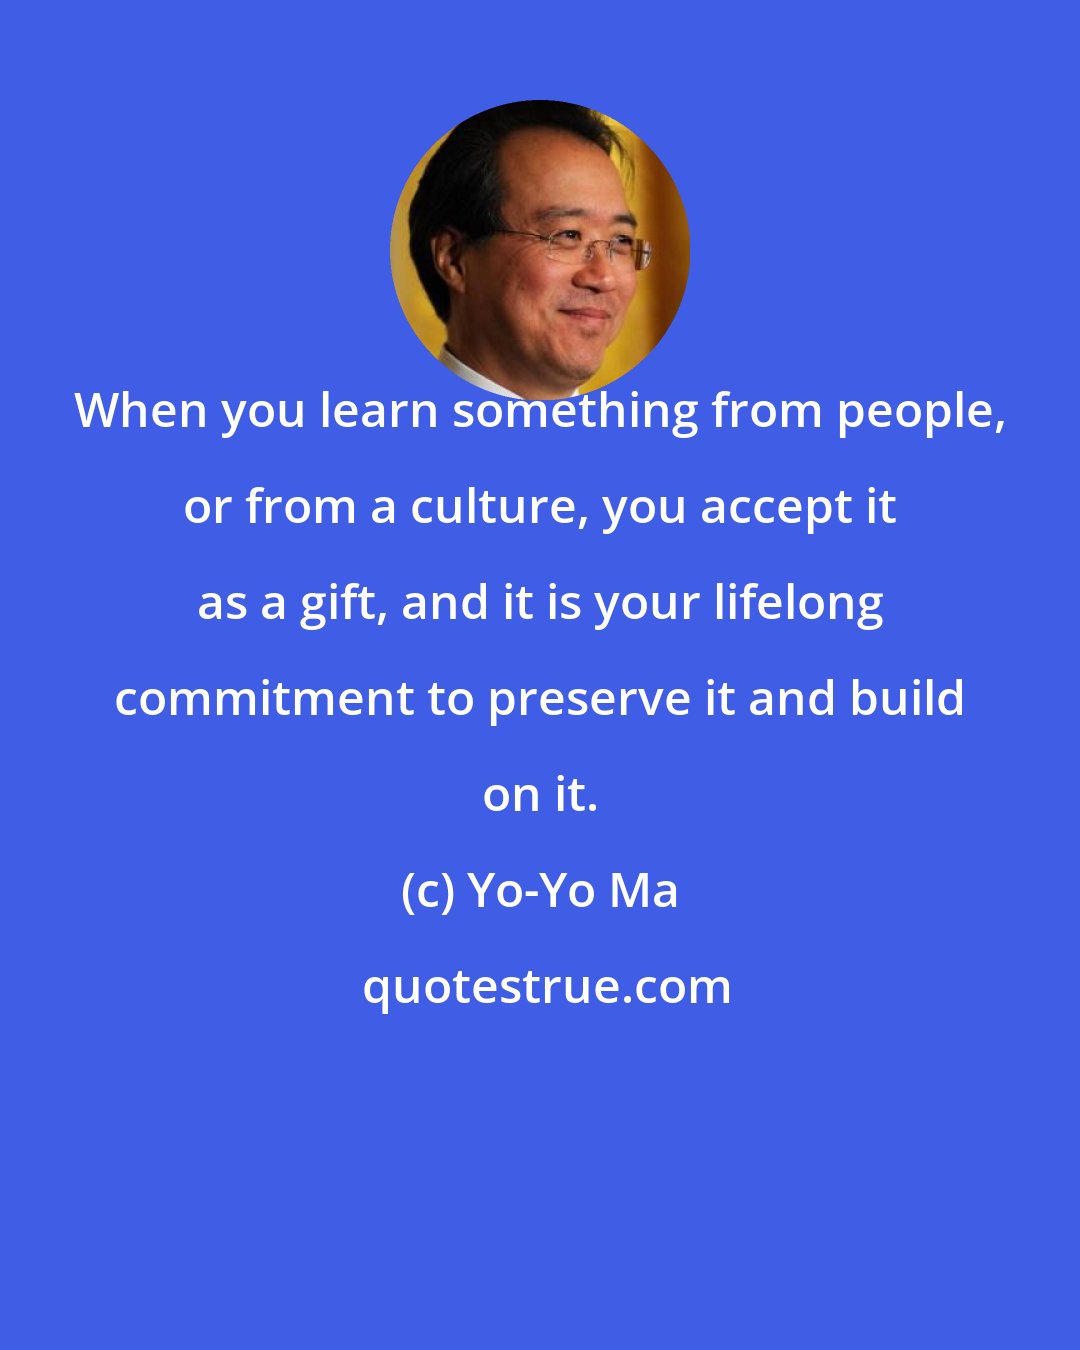 Yo-Yo Ma: When you learn something from people, or from a culture, you accept it as a gift, and it is your lifelong commitment to preserve it and build on it.